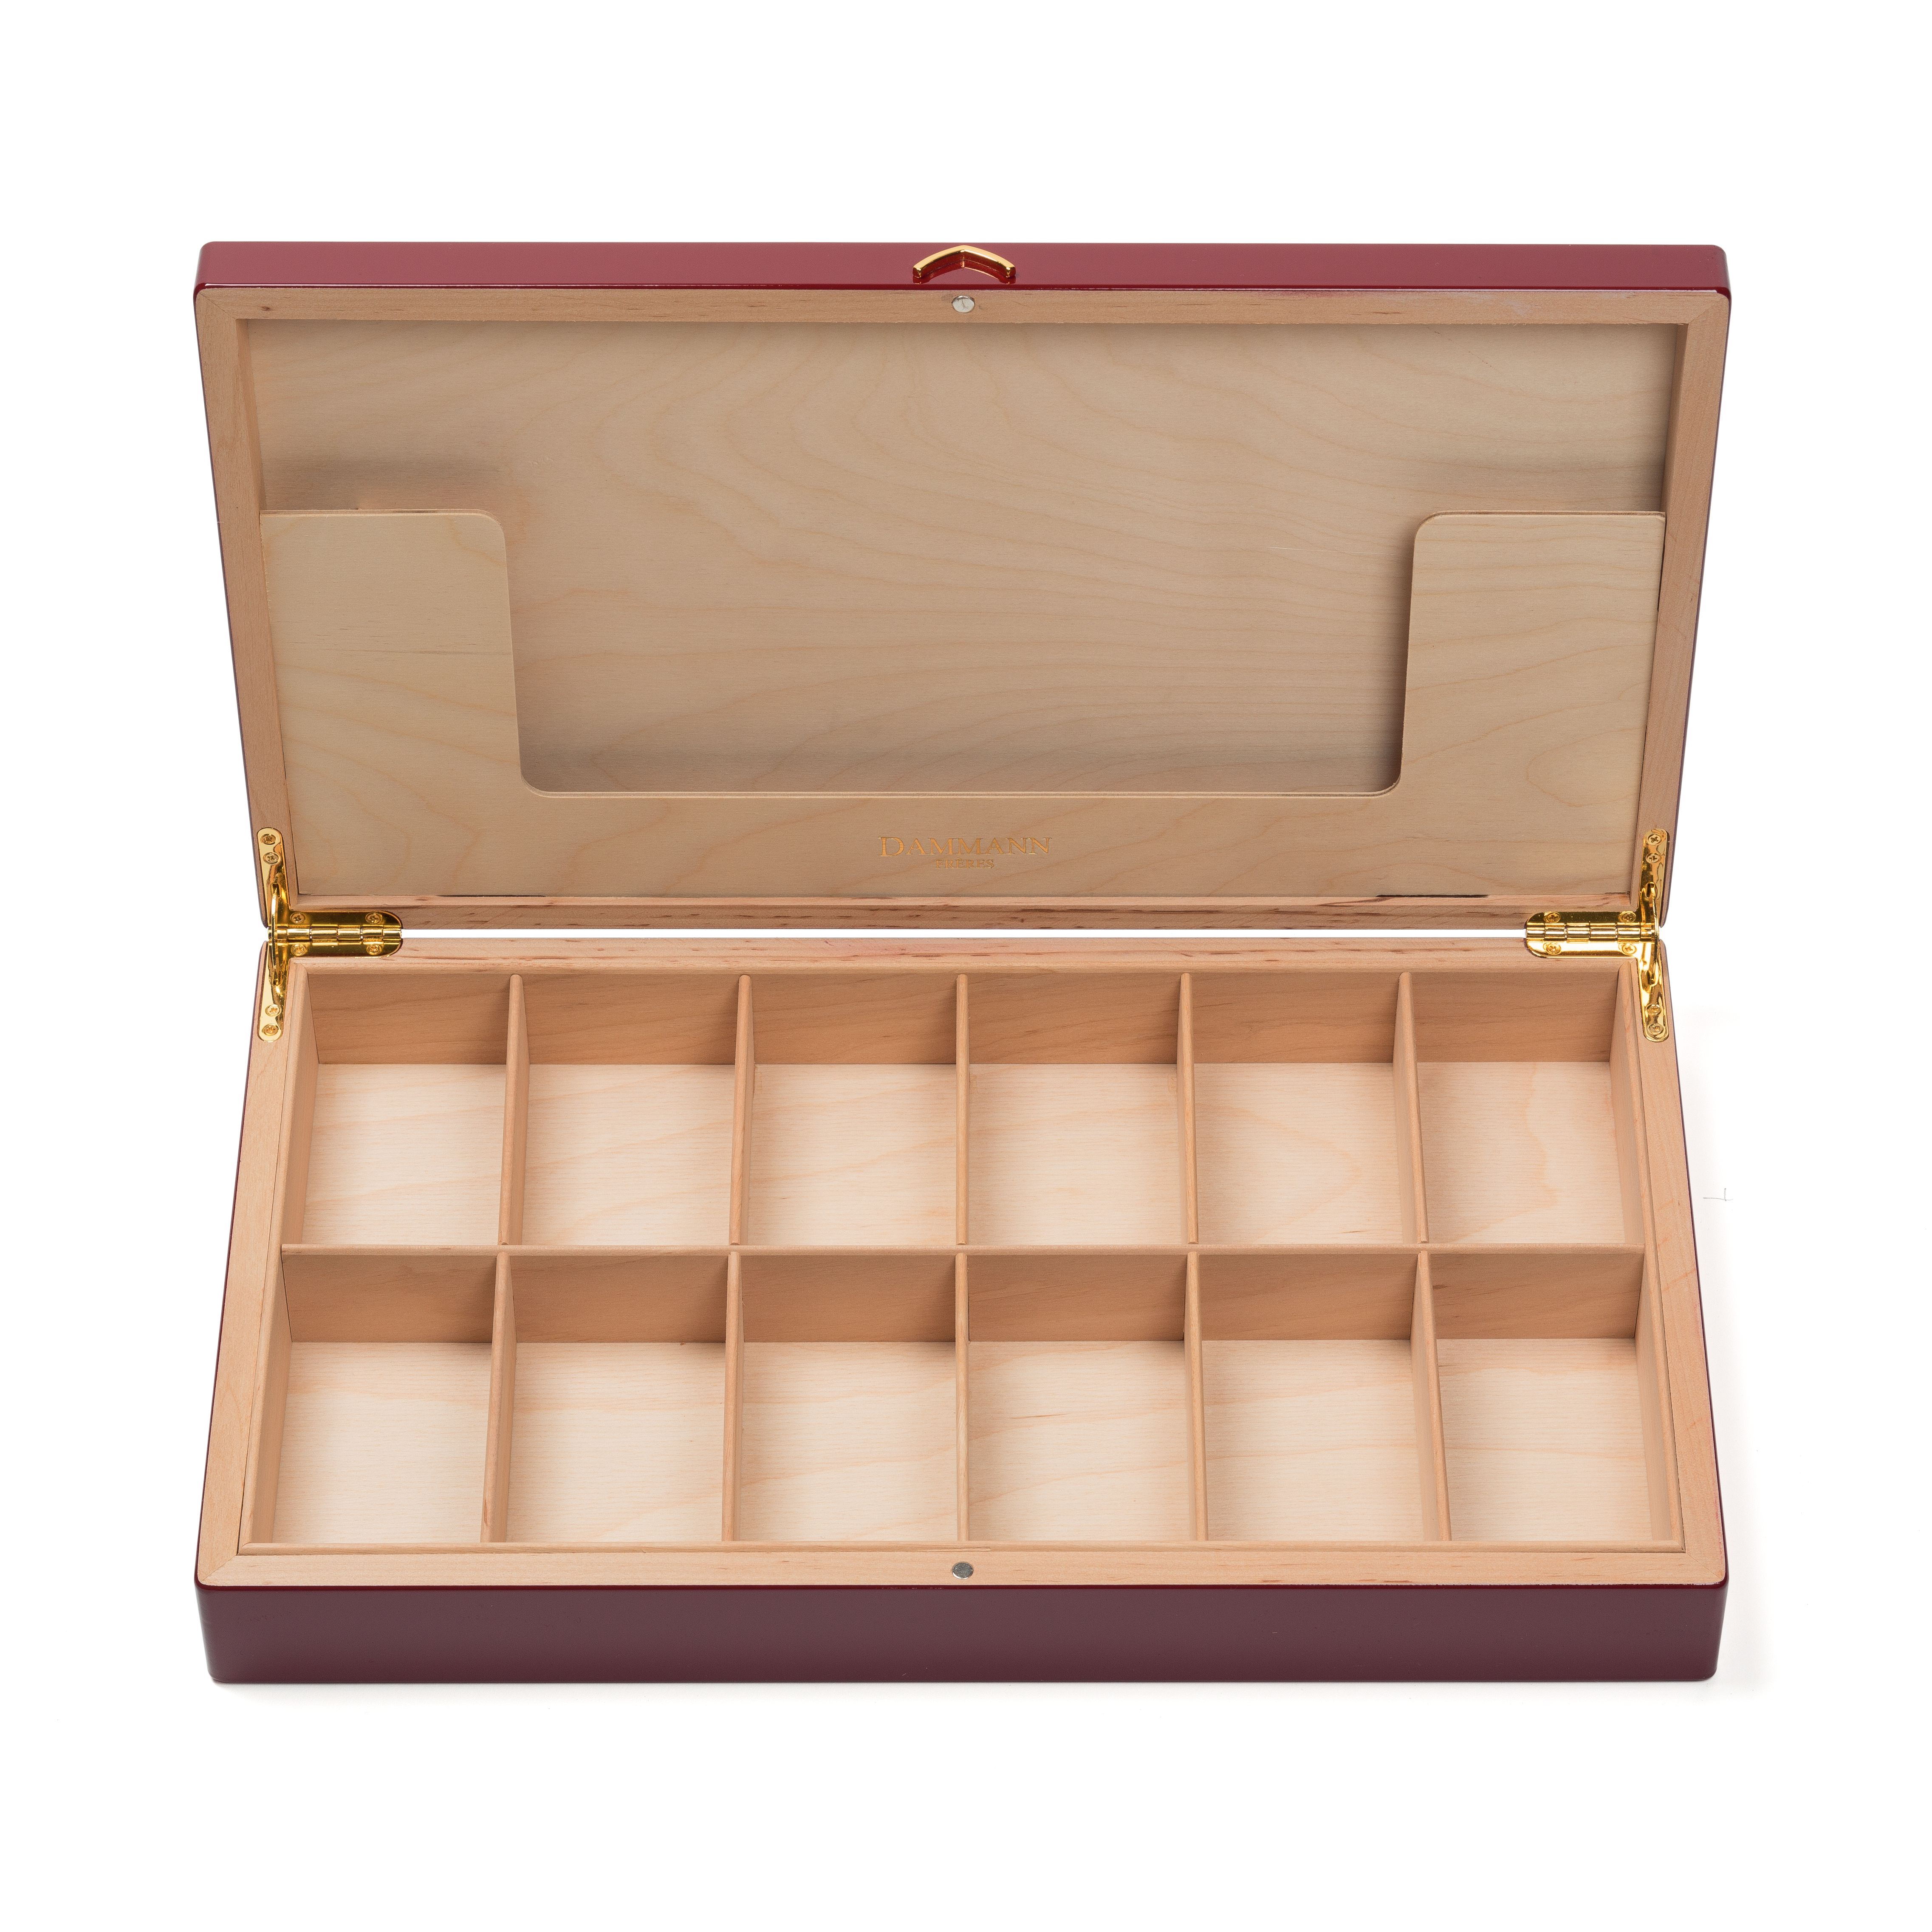 Dammann Frères Wooden Tea Box (up to 72 sachets), Caddy / Container, 18-21-1200